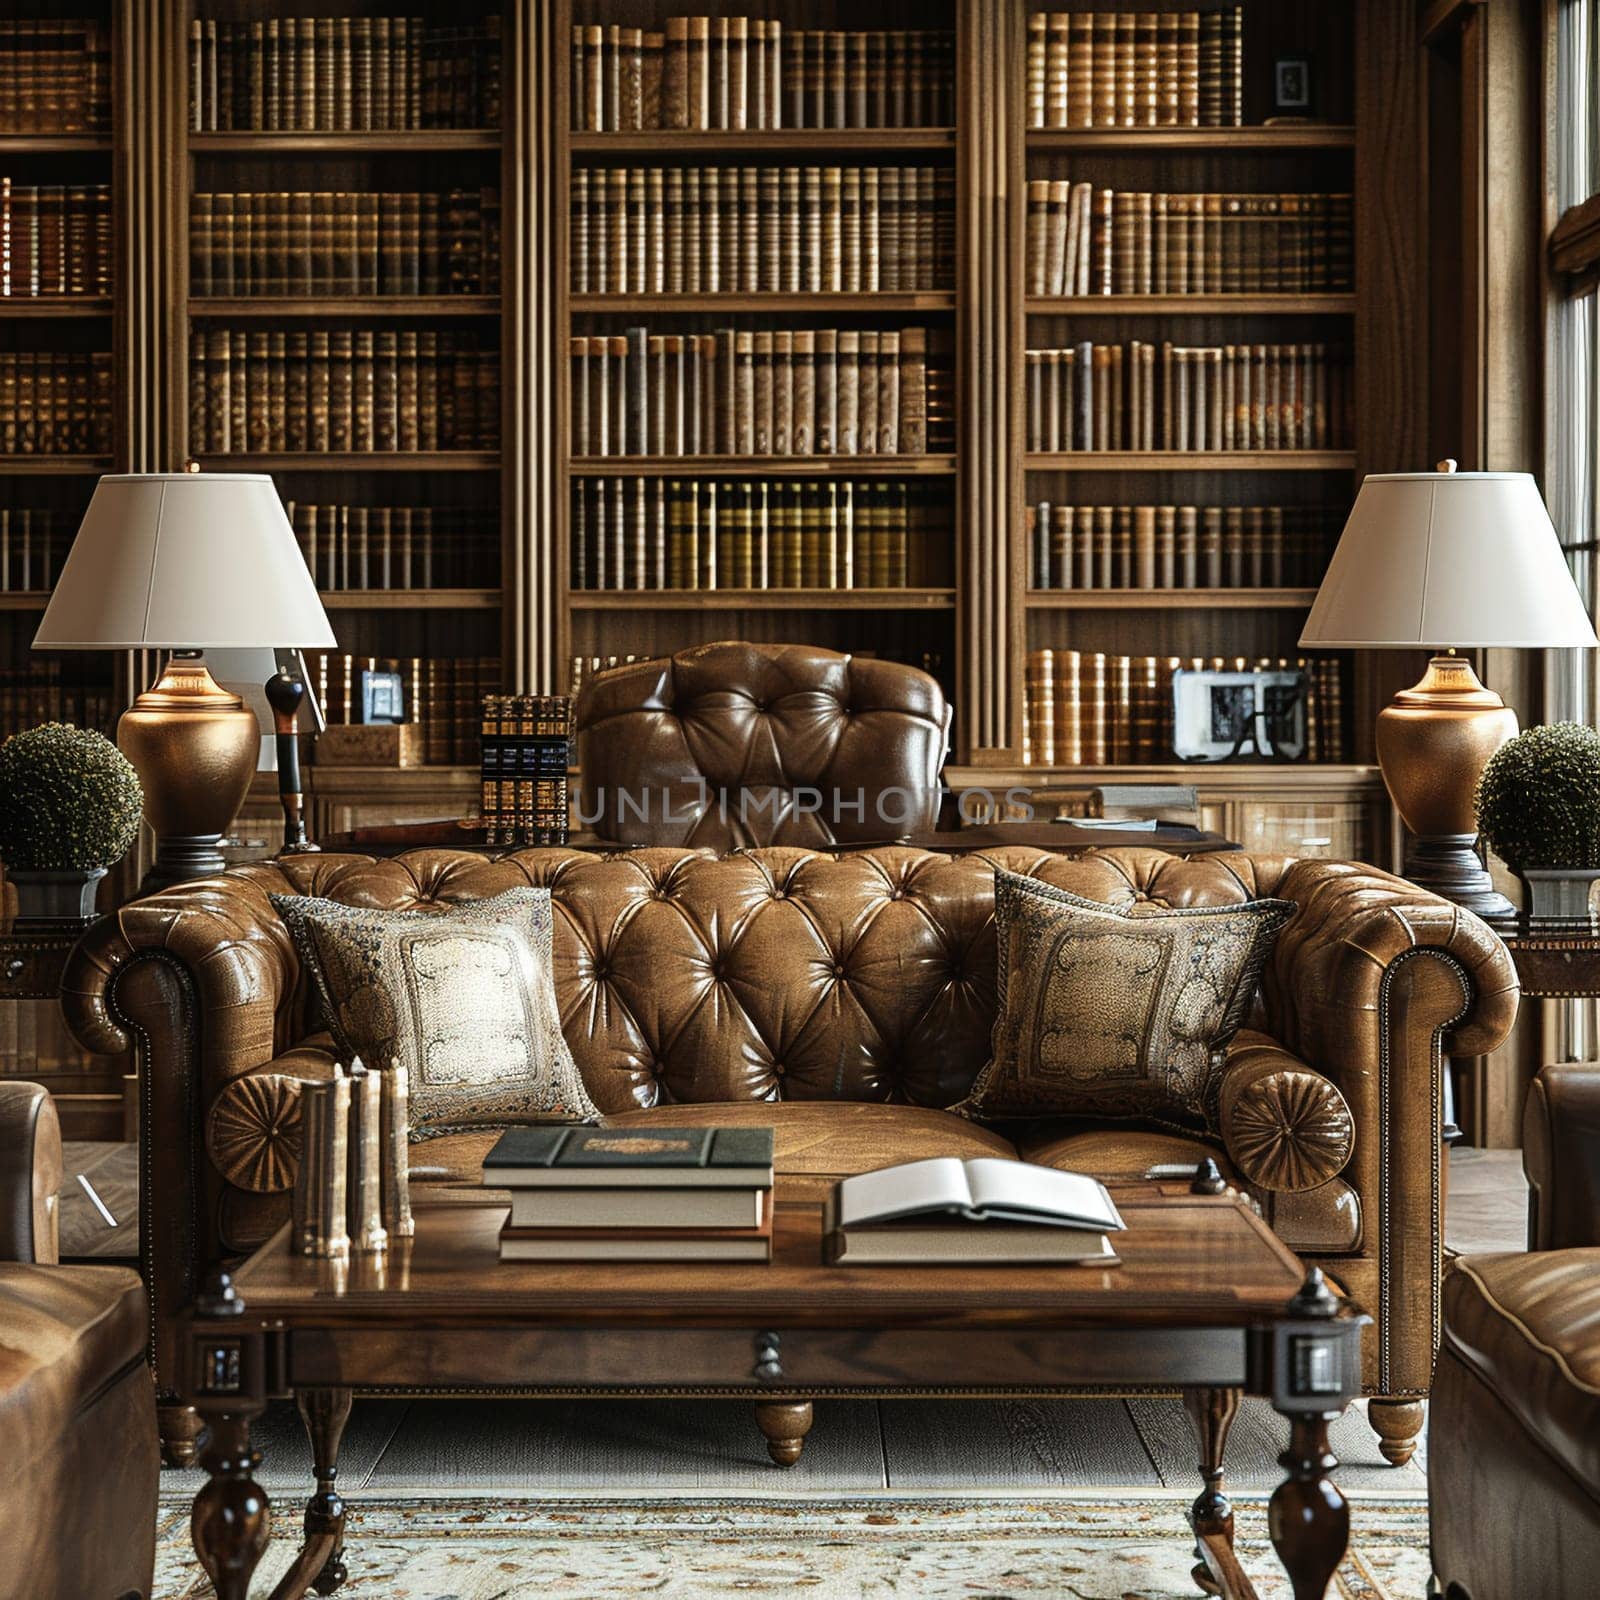 Vintage-inspired study with leather-bound books and a classic writing deskHyperrealistic